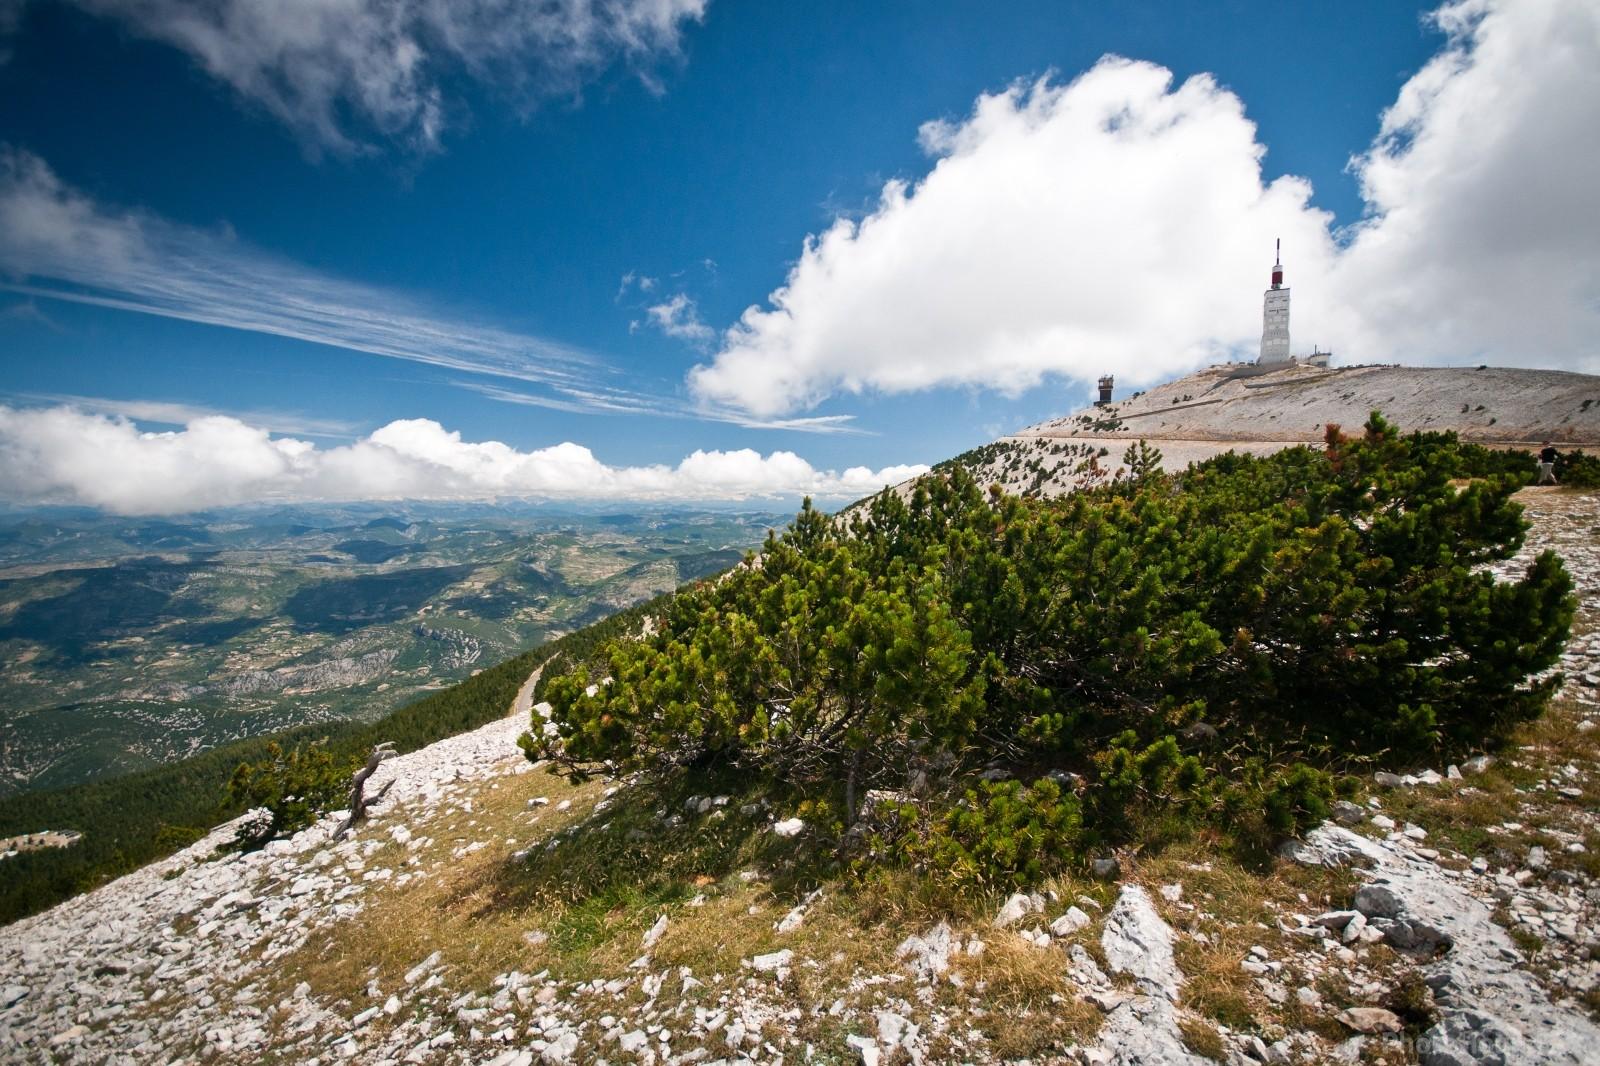 Image of Mt Ventoux from the west by VOJTa Herout